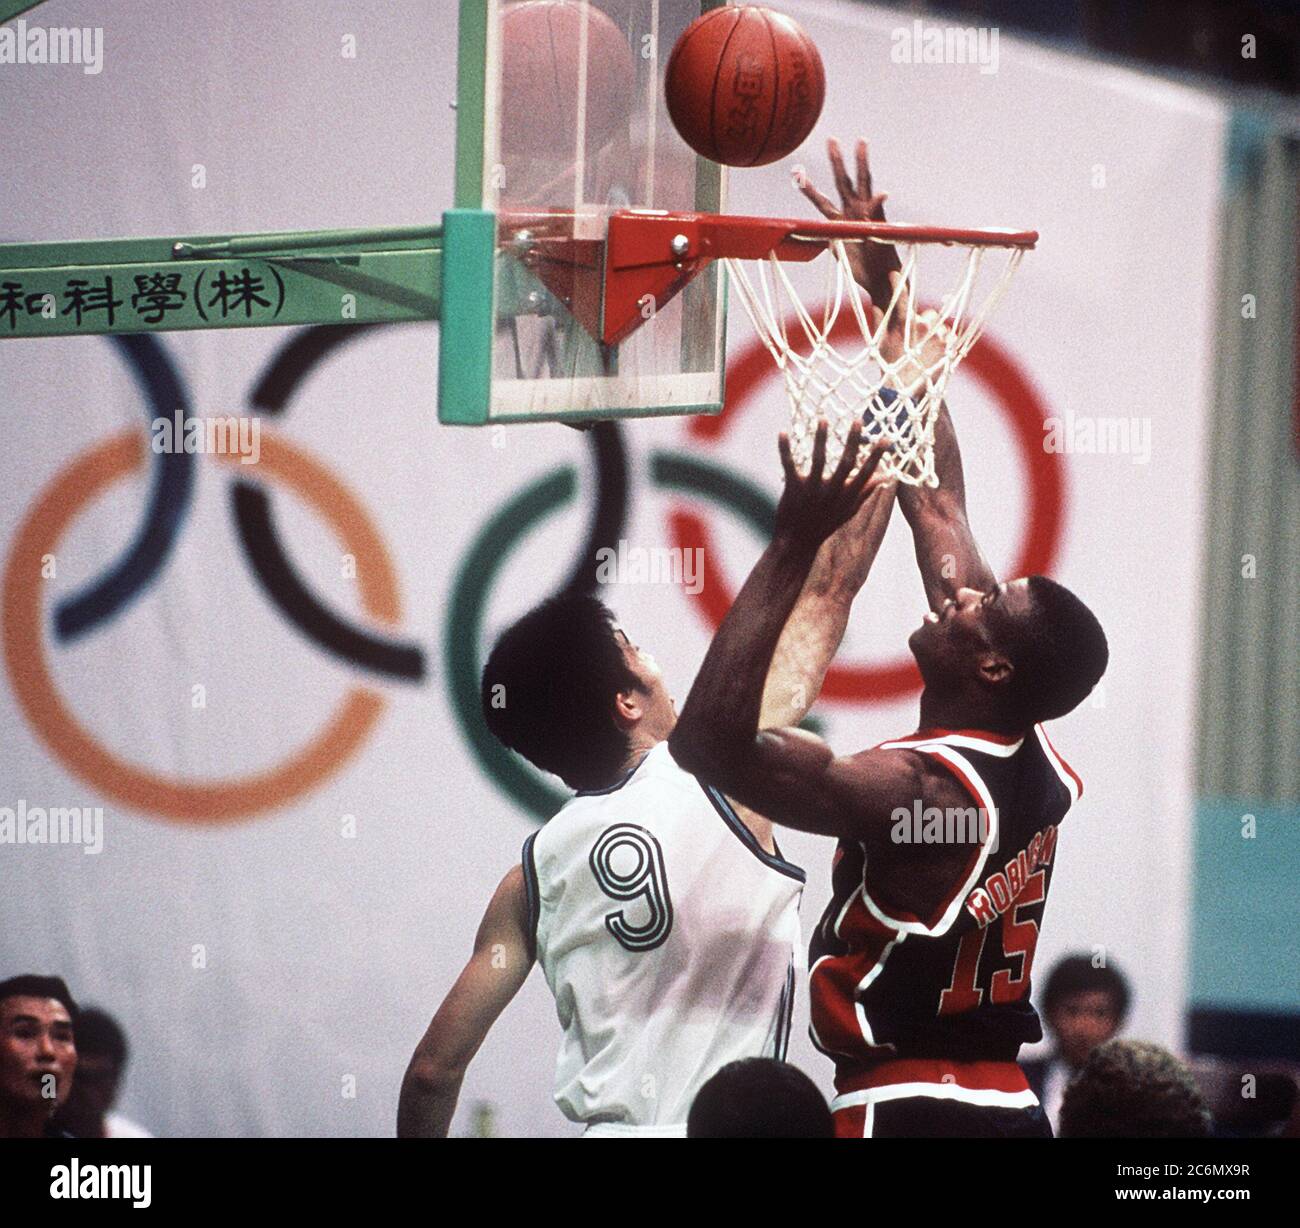 Ensign David Robinson of the U.S. Olympic men's basketball team goes up for a shot during a preliminary round game against the team from China during the XXIV Olympic Games. Stock Photo